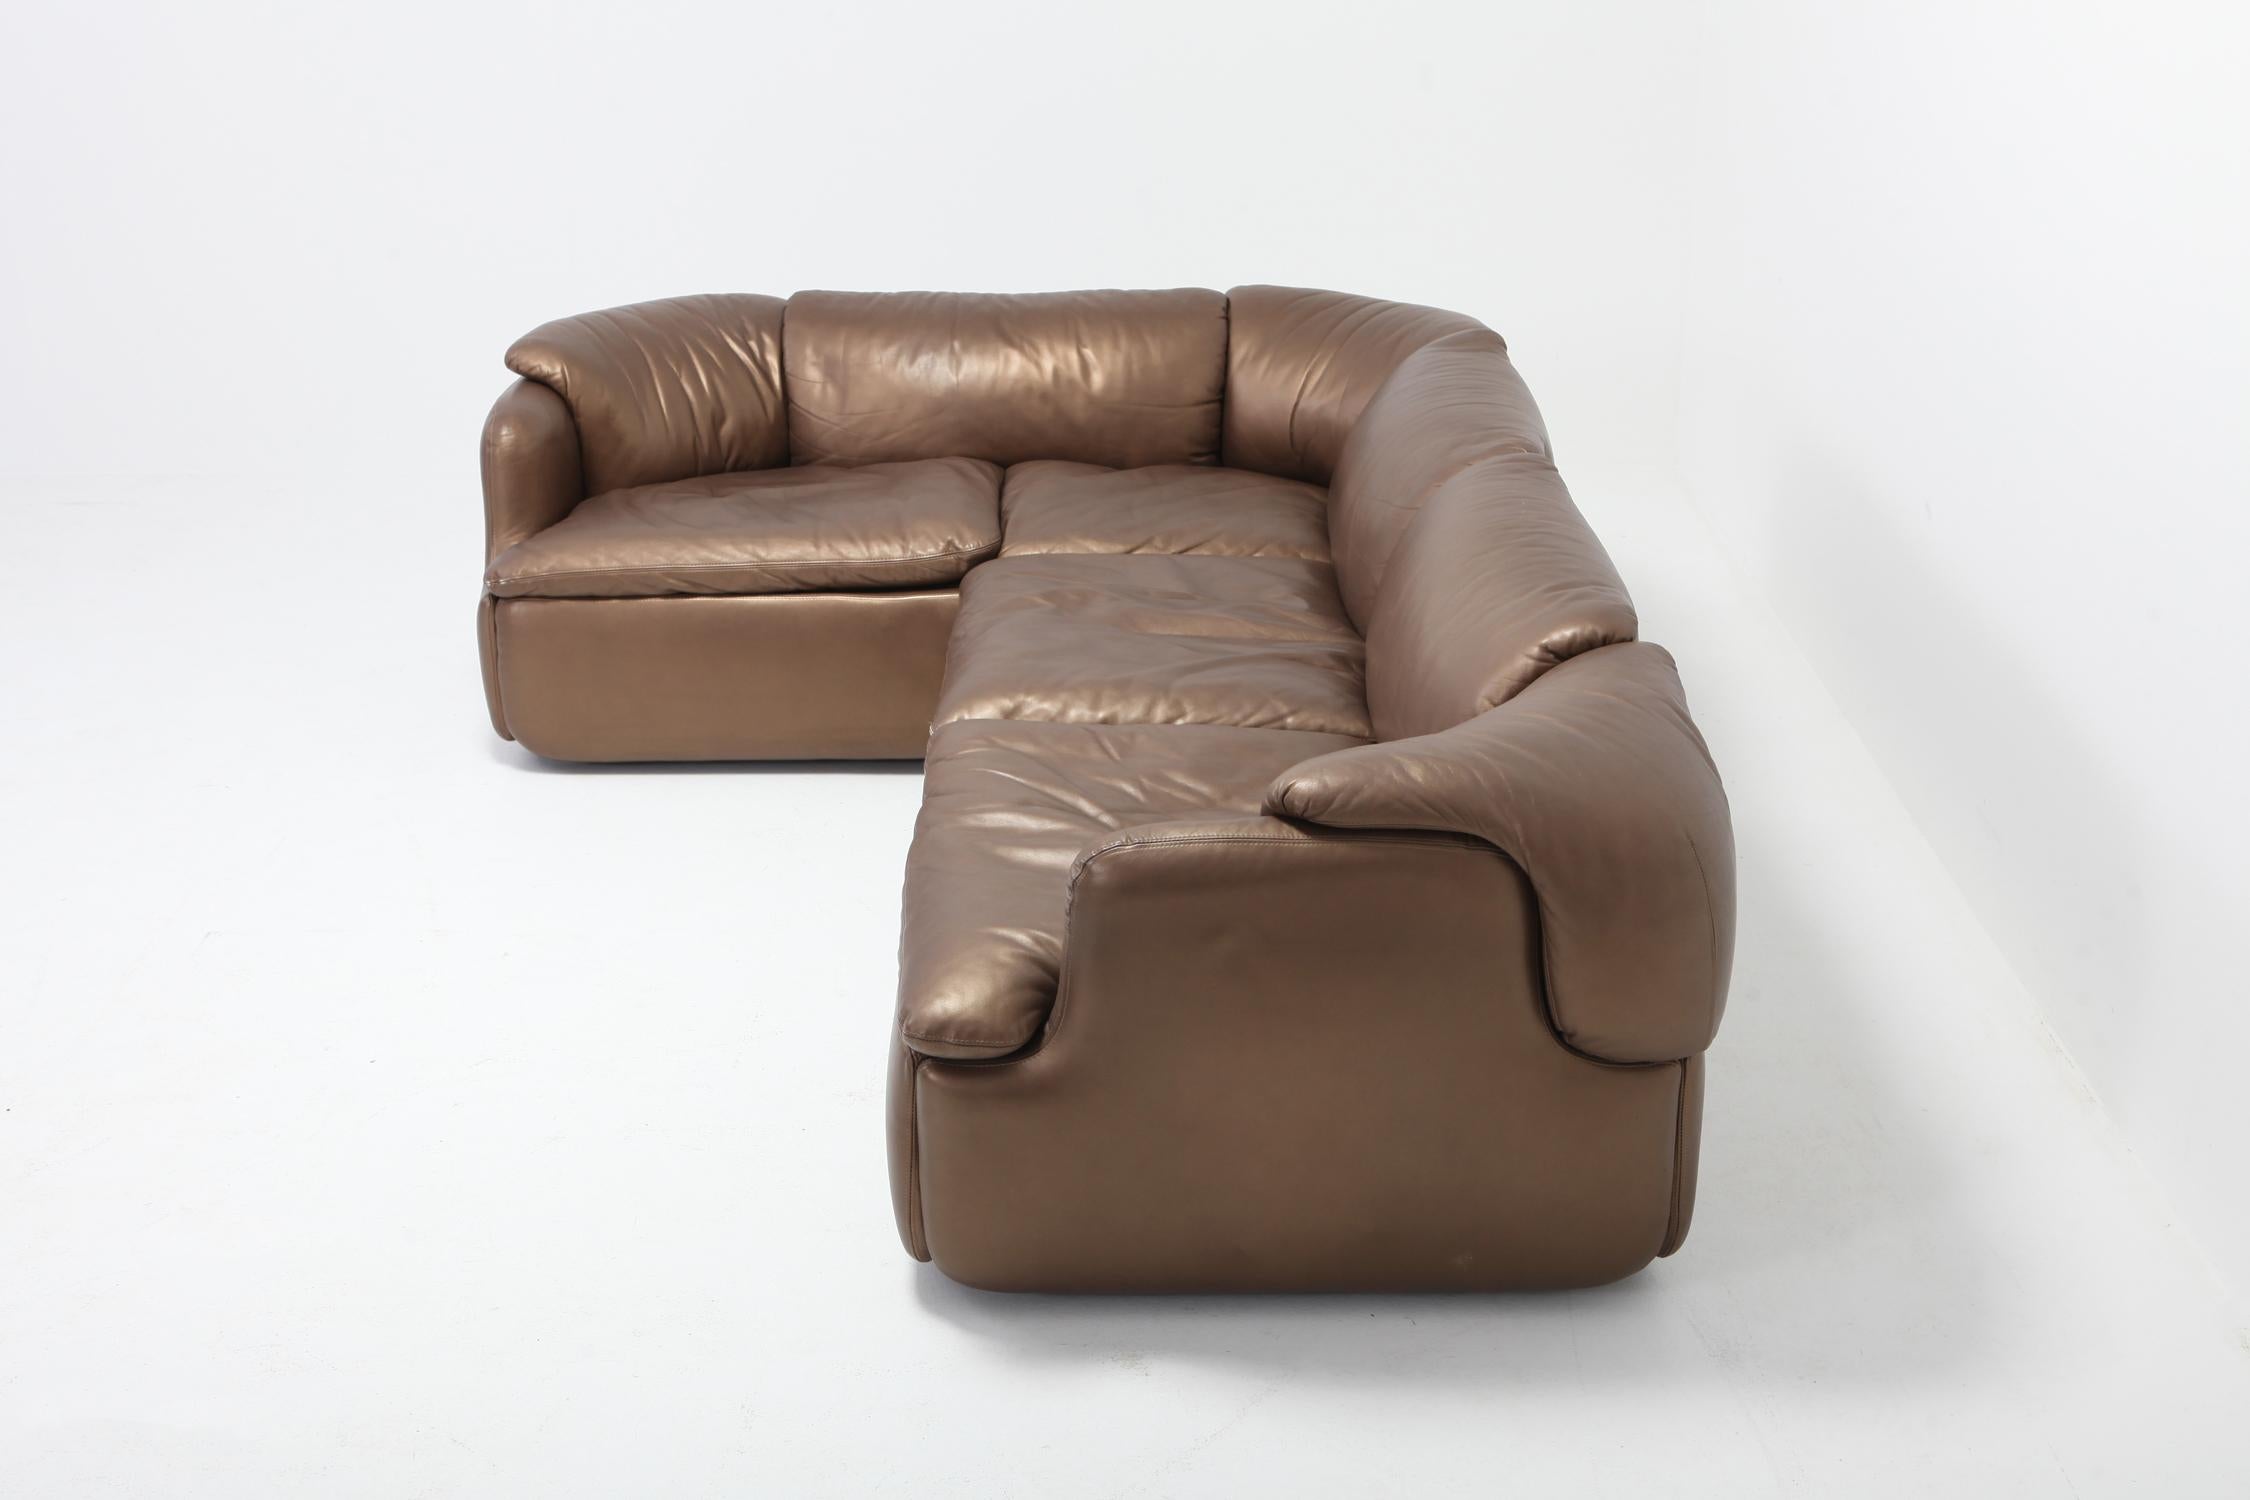 Bronze Leather Saporiti High-End Sectional Sofa 'Confidential' 10